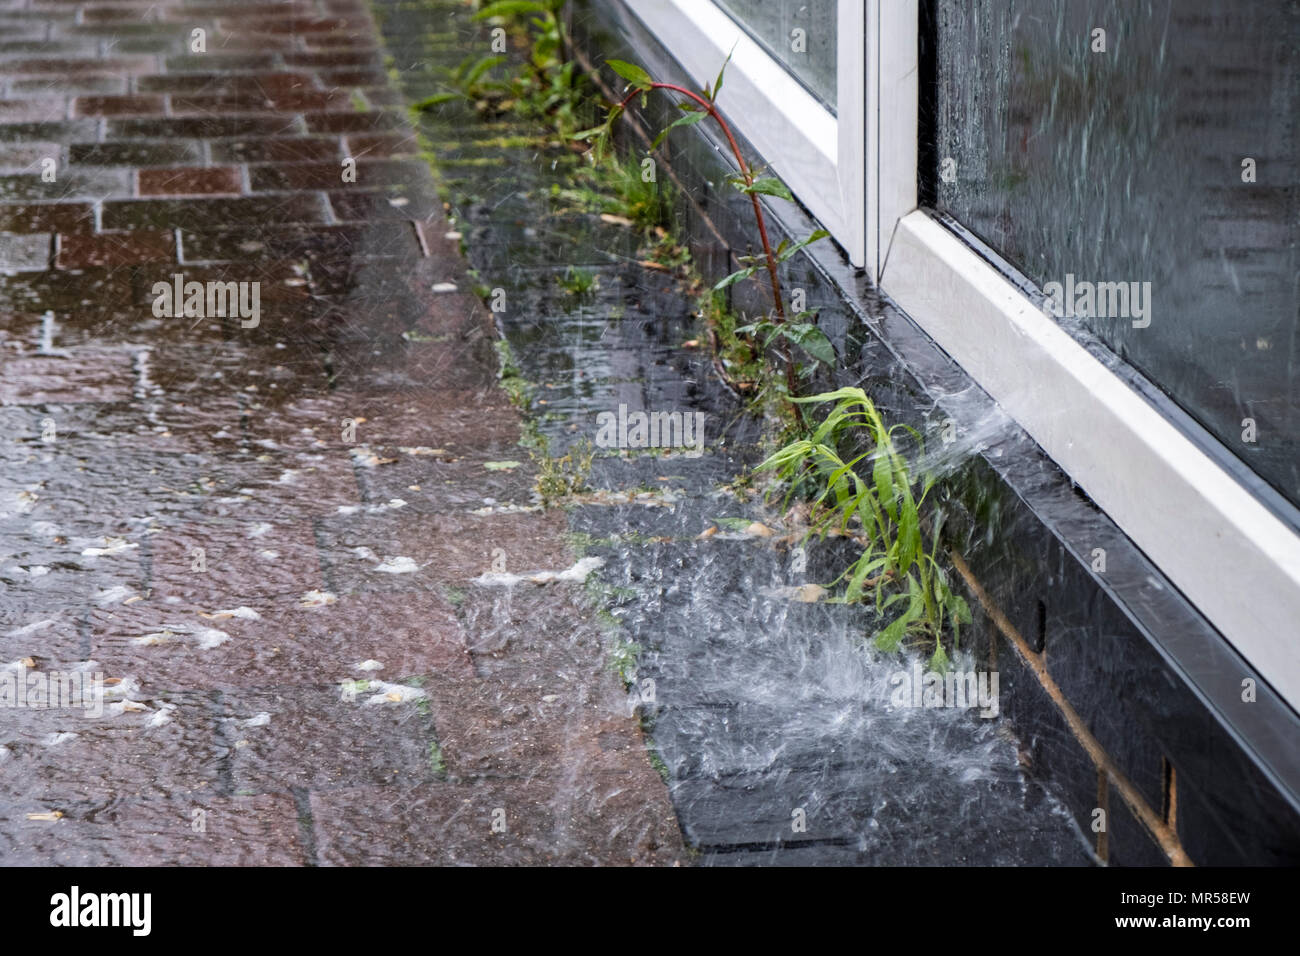 Wet weather. Rain water flowing down a glass window and splashing on to the pavement, Nottinghamshire, England, UK Stock Photo